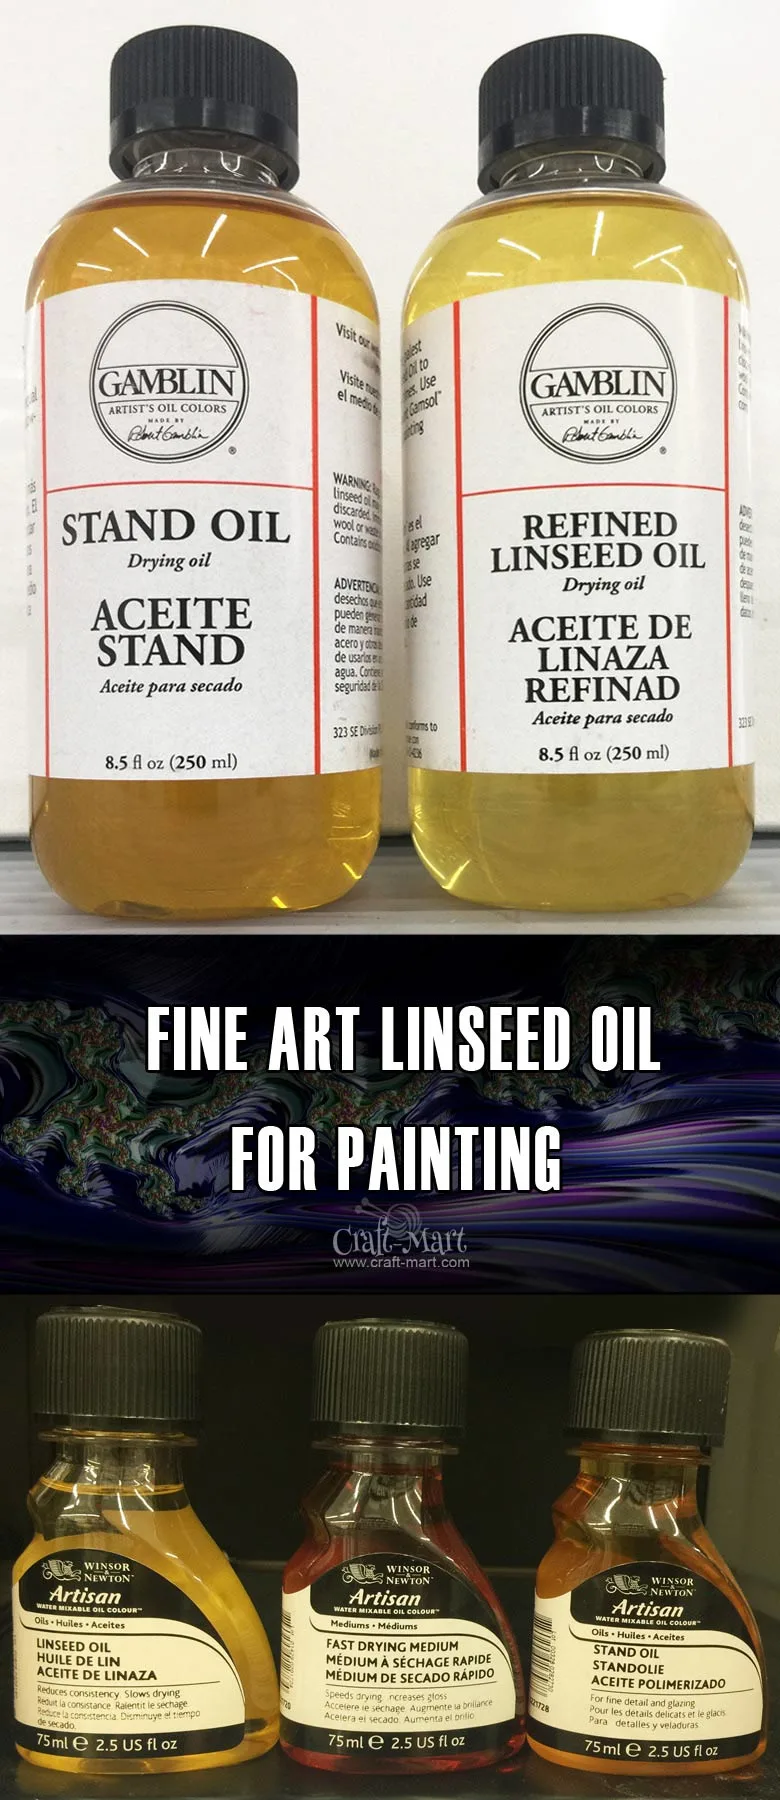 Use linseed oil for fine art painting and acrylic pouring recipes